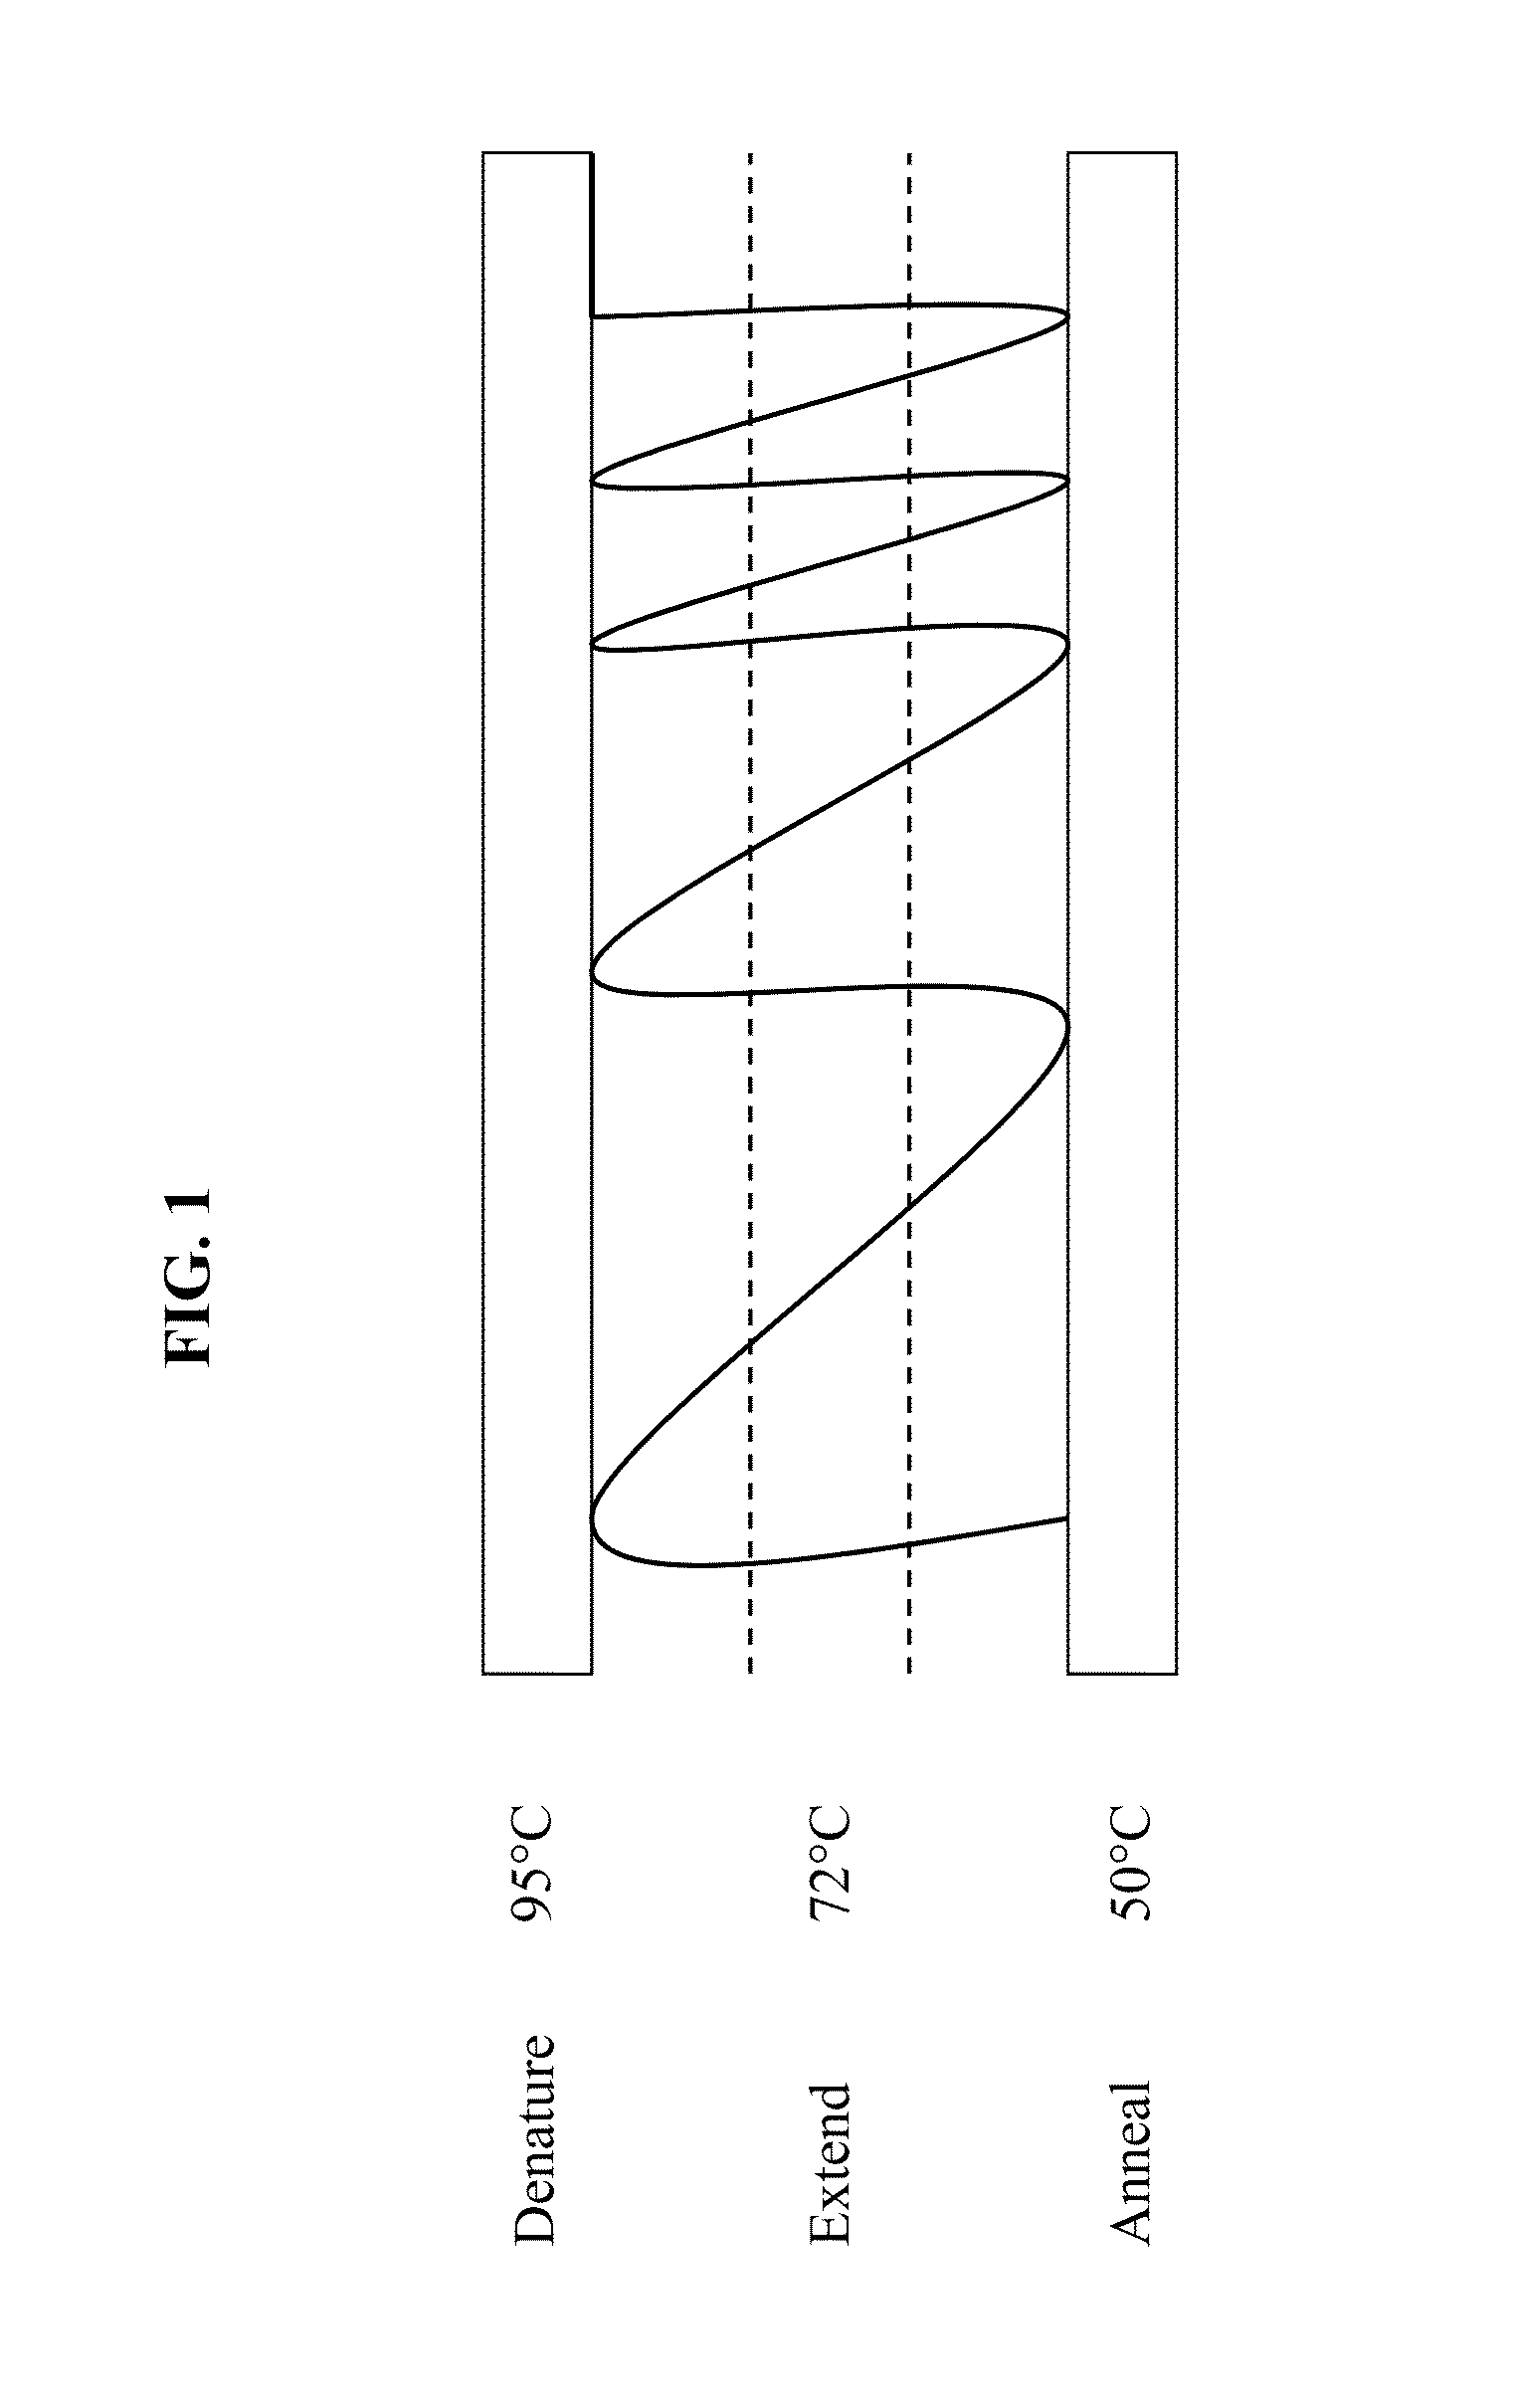 Channels with cross-sectional thermal gradients